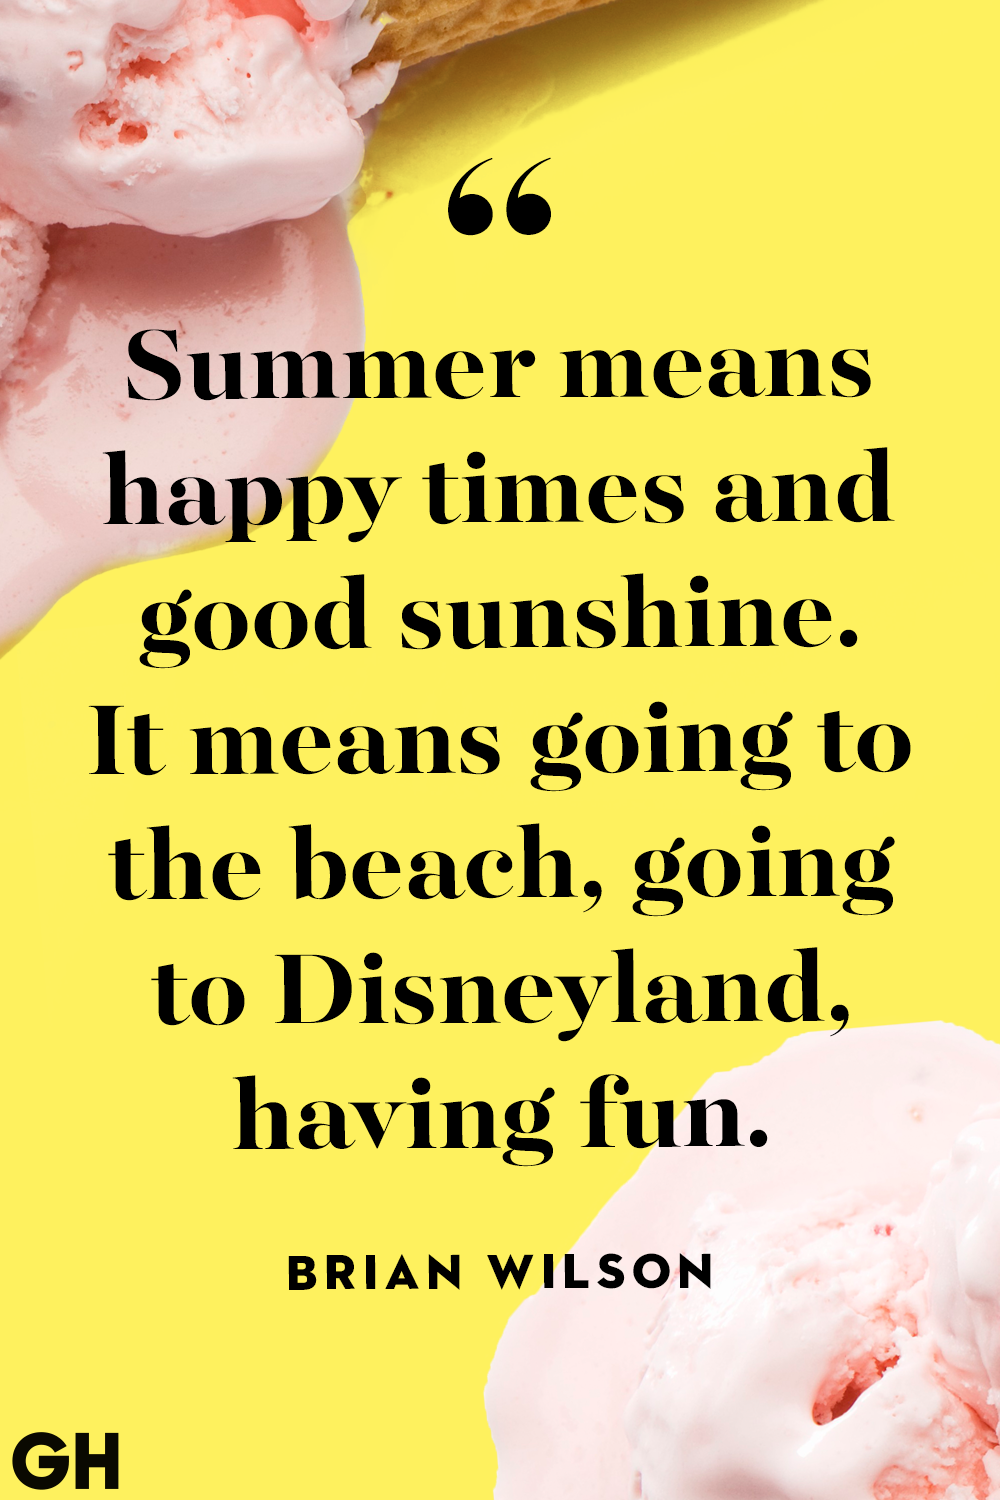 40 Best Summer Quotes - Short Happy Sayings About Summertime